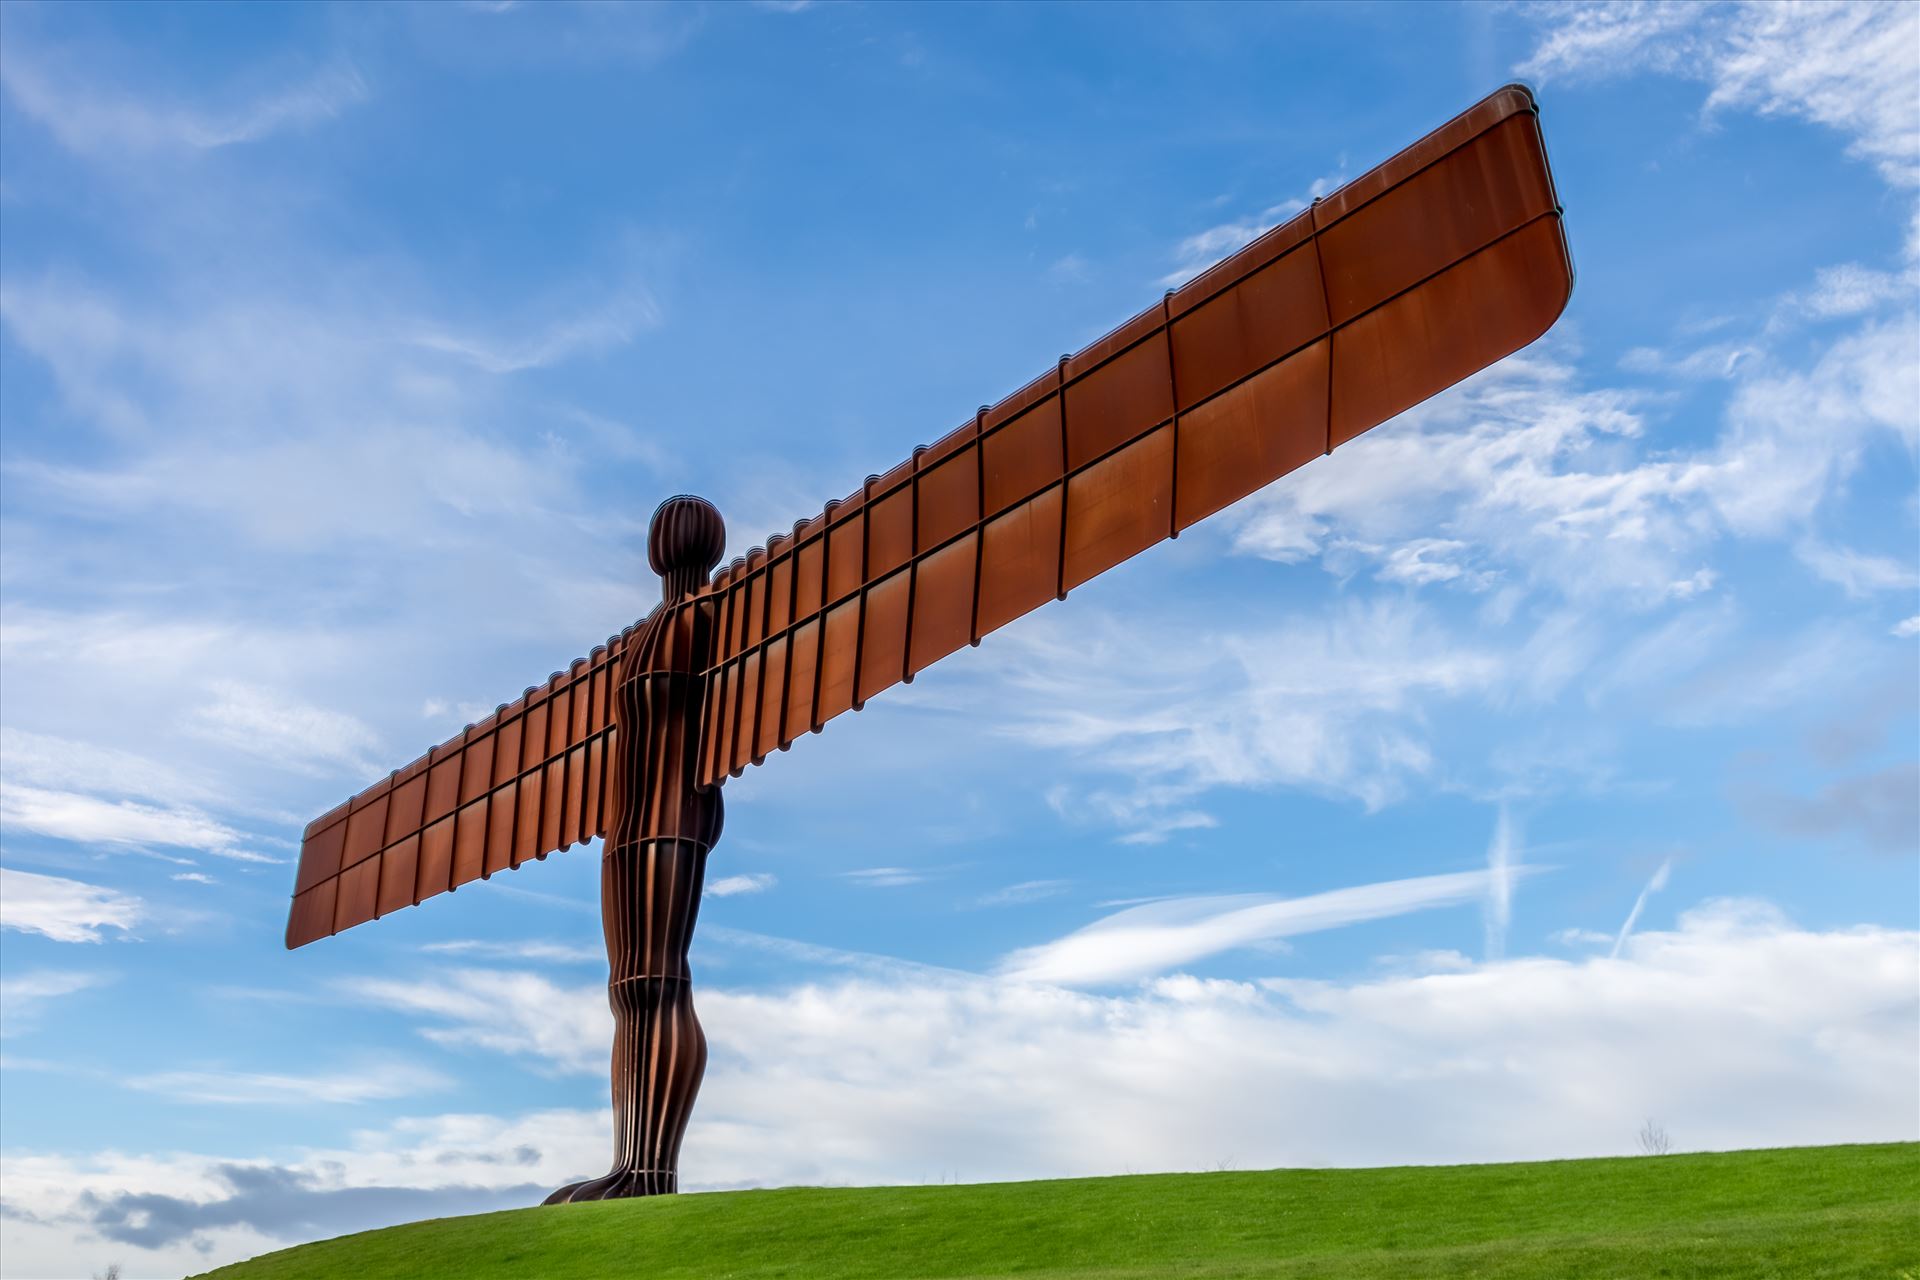 The Angel of the North - The Angel of the North is a contemporary sculpture, designed by Antony Gormley, located in Gateshead,  England.Completed in 1998, it is a steel sculpture of an angel, 20 metres (66 ft) tall, with wings measuring 54 metres (177 ft) across. by philreay